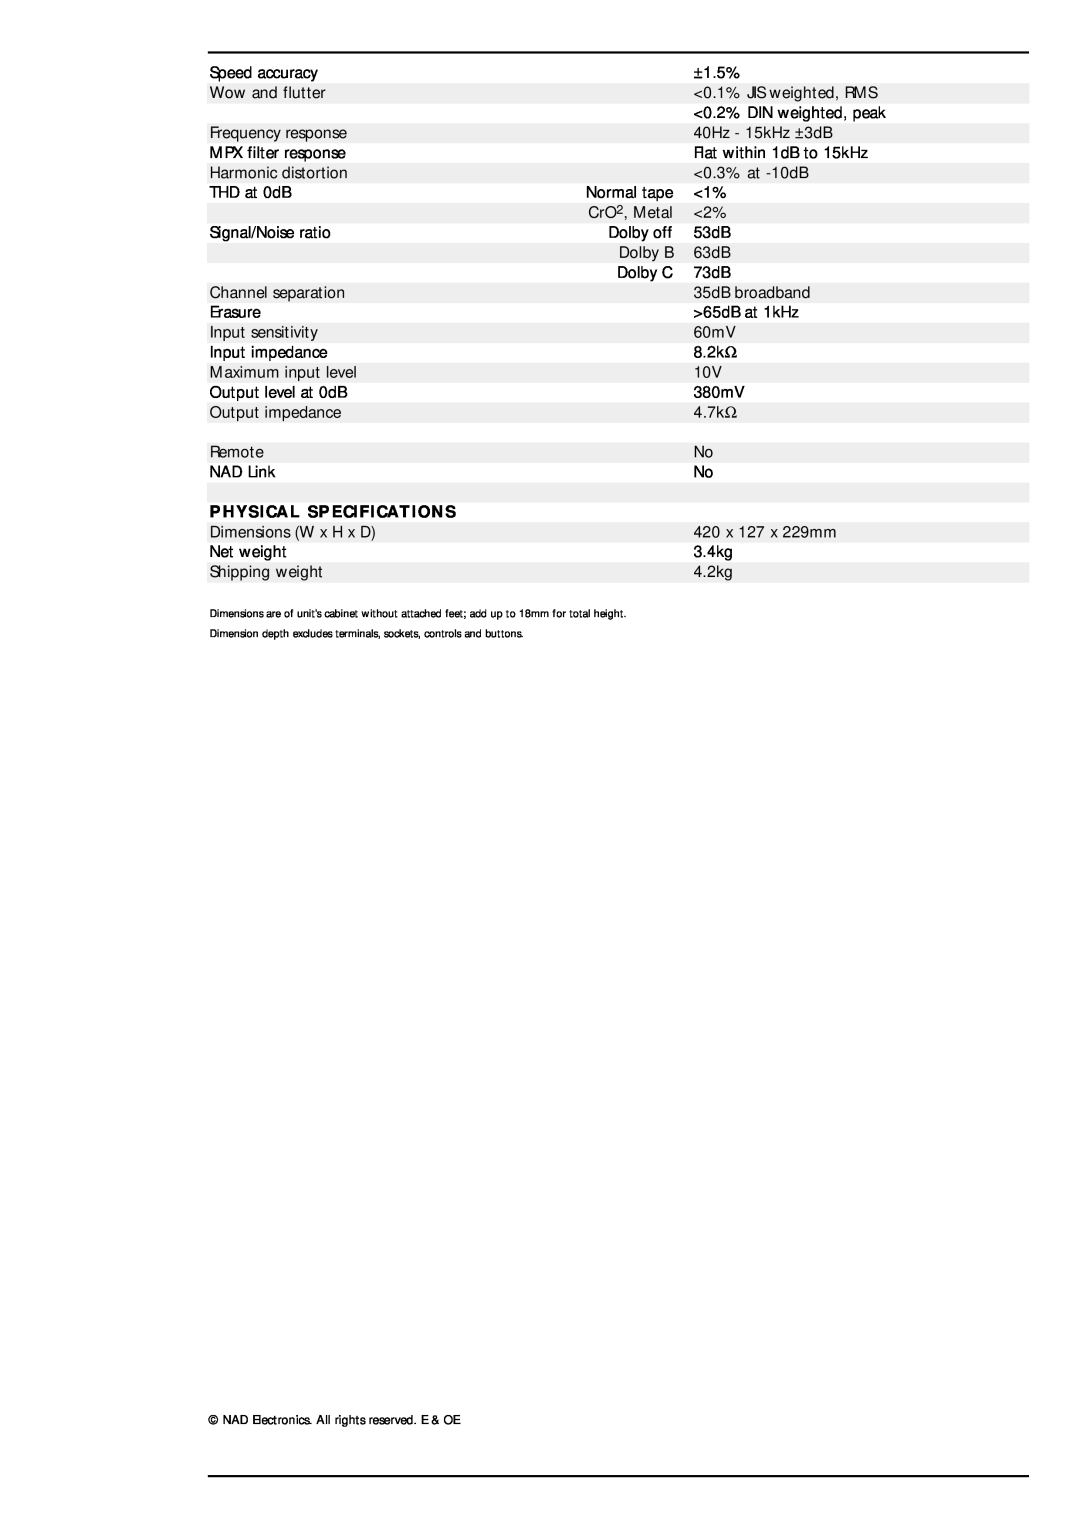 NAD 6130 brochure Physical Specifications 